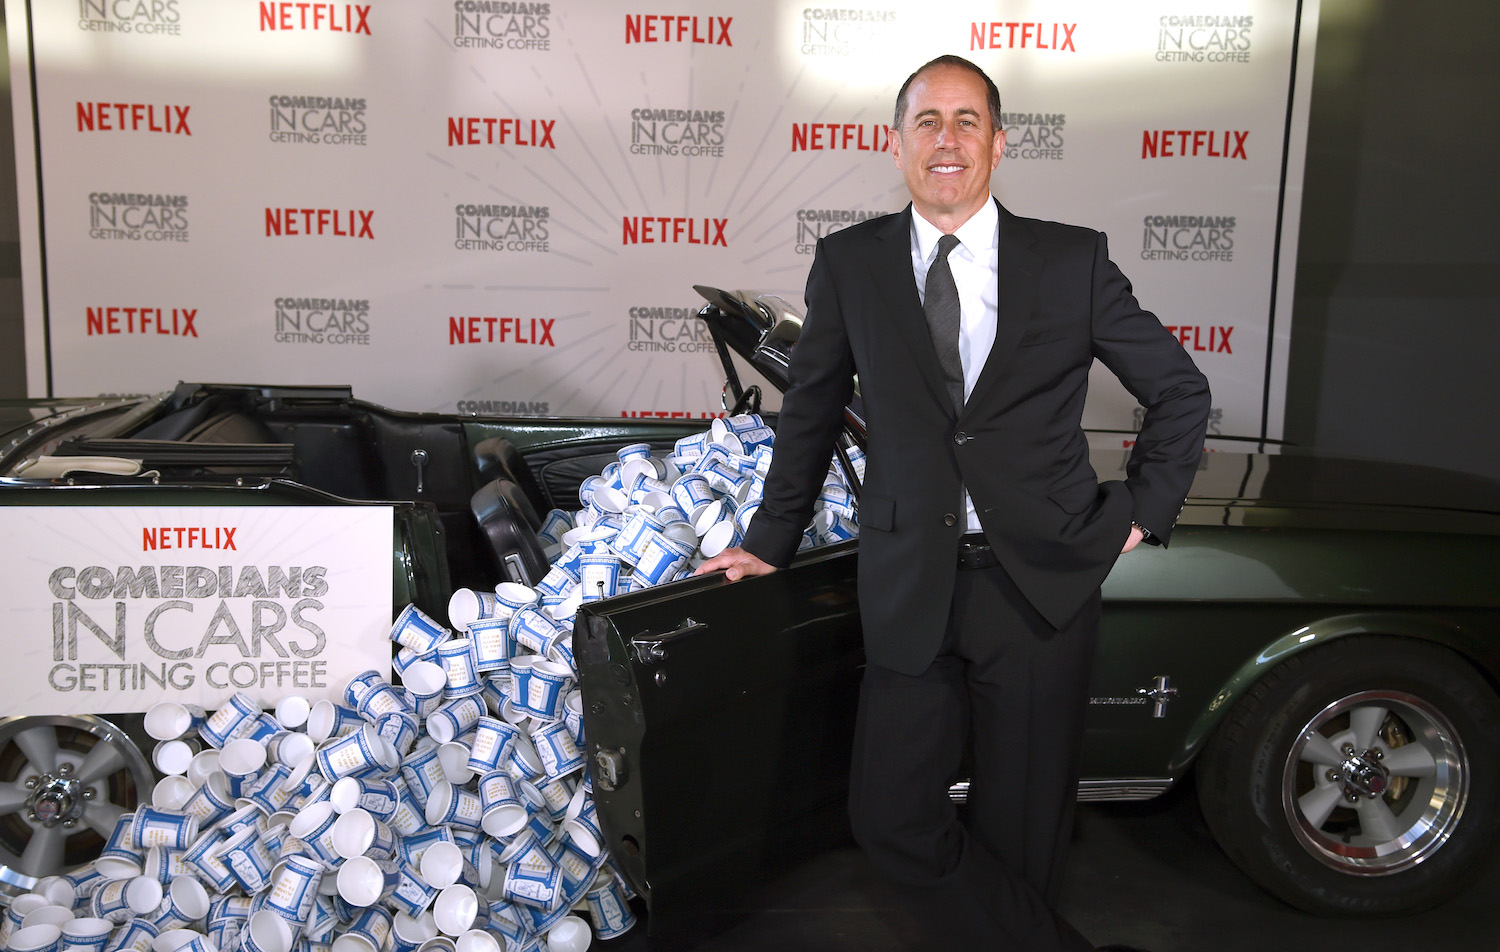 See the ridiculous movie car Jerry Seinfeld takes Seth Rogen for a cup of coffee in during comedians in cars getting coffee.